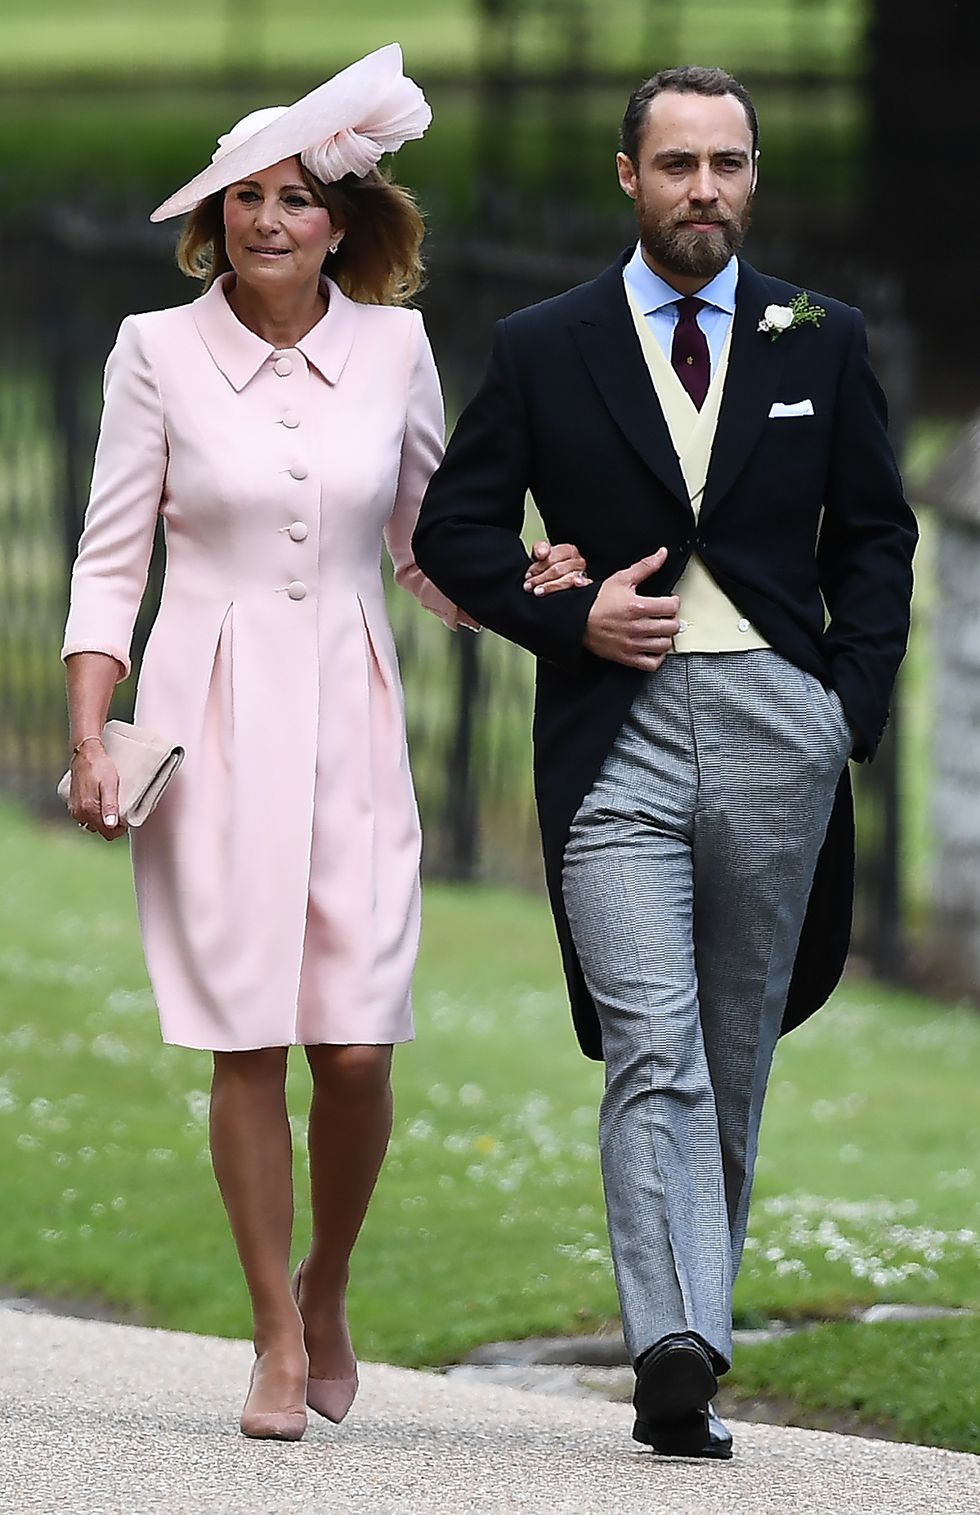 ENGLEFIELD GREEN, ENGLAND - MAY 20:  Carole Middleton, Pippa's mother and James Middleton, Pippa's brother attend the wedding of Pippa Middleton and James Matthews at St Mark's Church on May 20, 2017 in Englefield Green, England.  (Photo by Justin Tallis - WPA Pool/Getty Images)